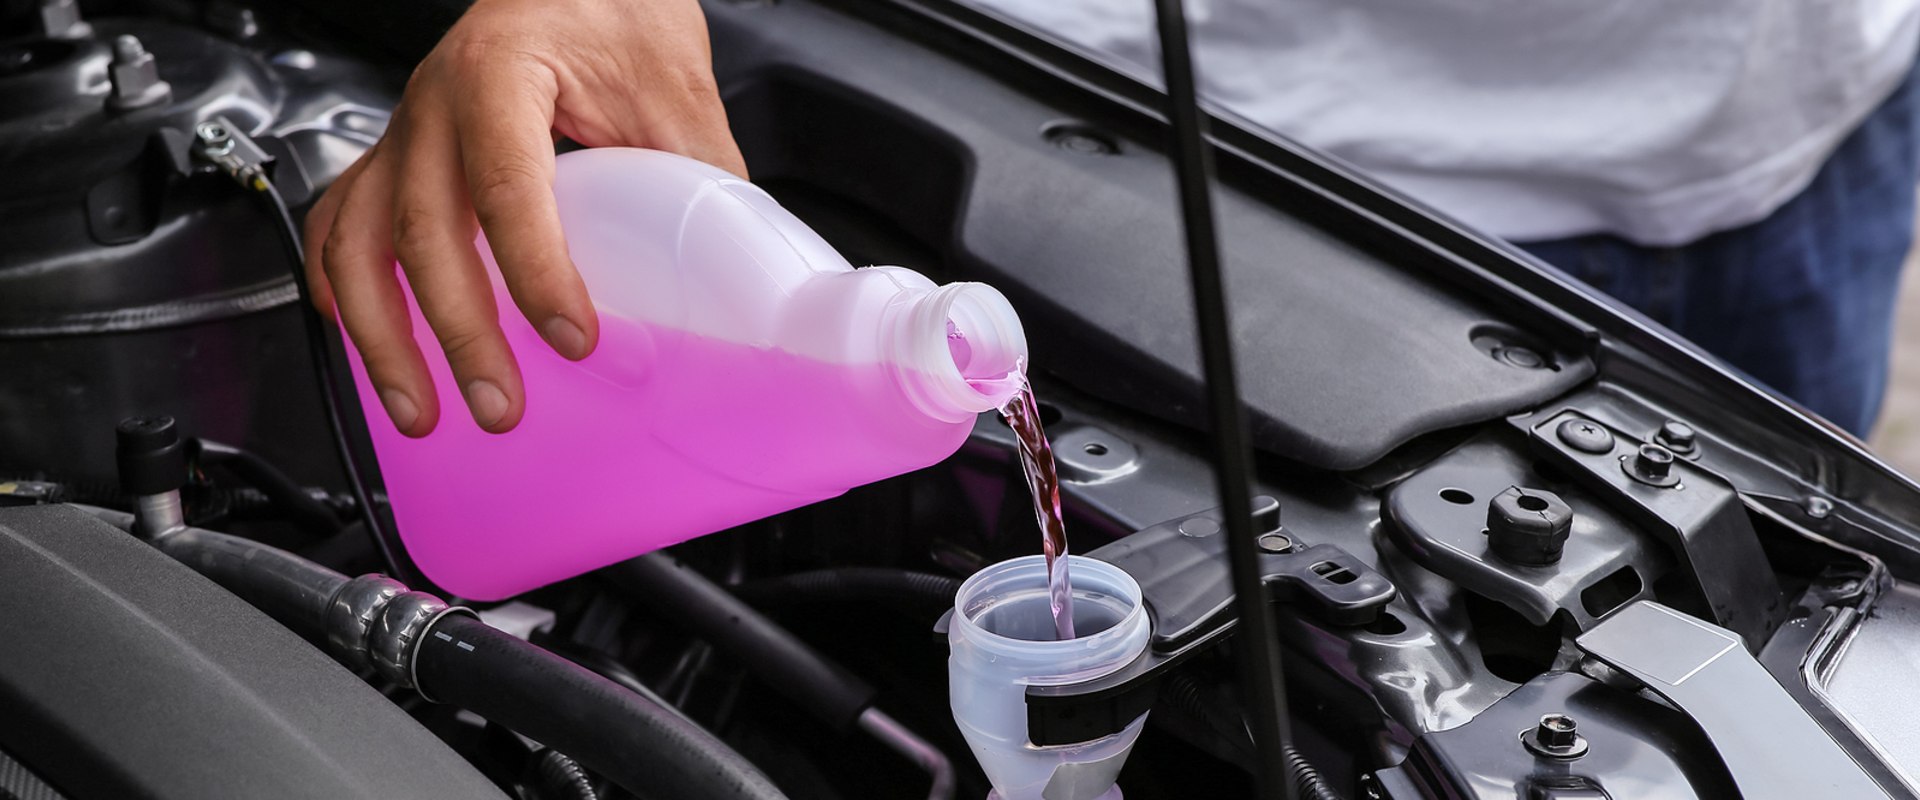 How often should you check vehicle fluids?